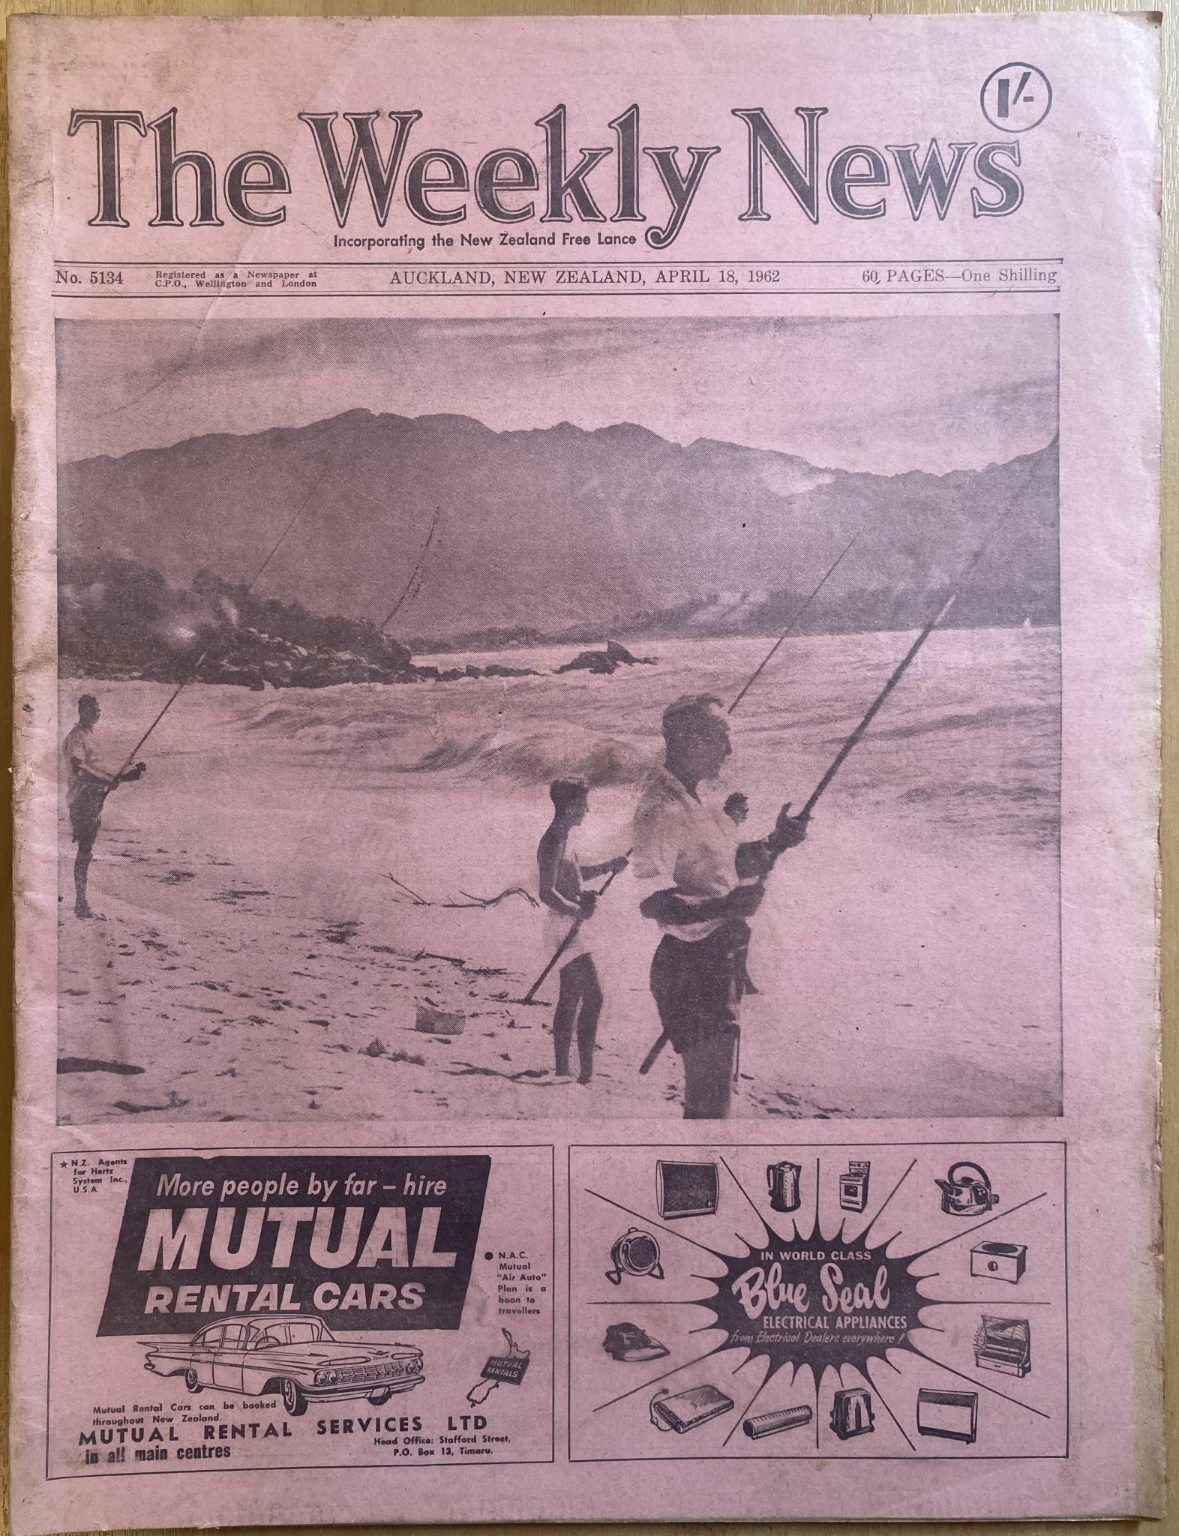 OLD NEWSPAPER: The Weekly News, No. 5134, 18 April 1962